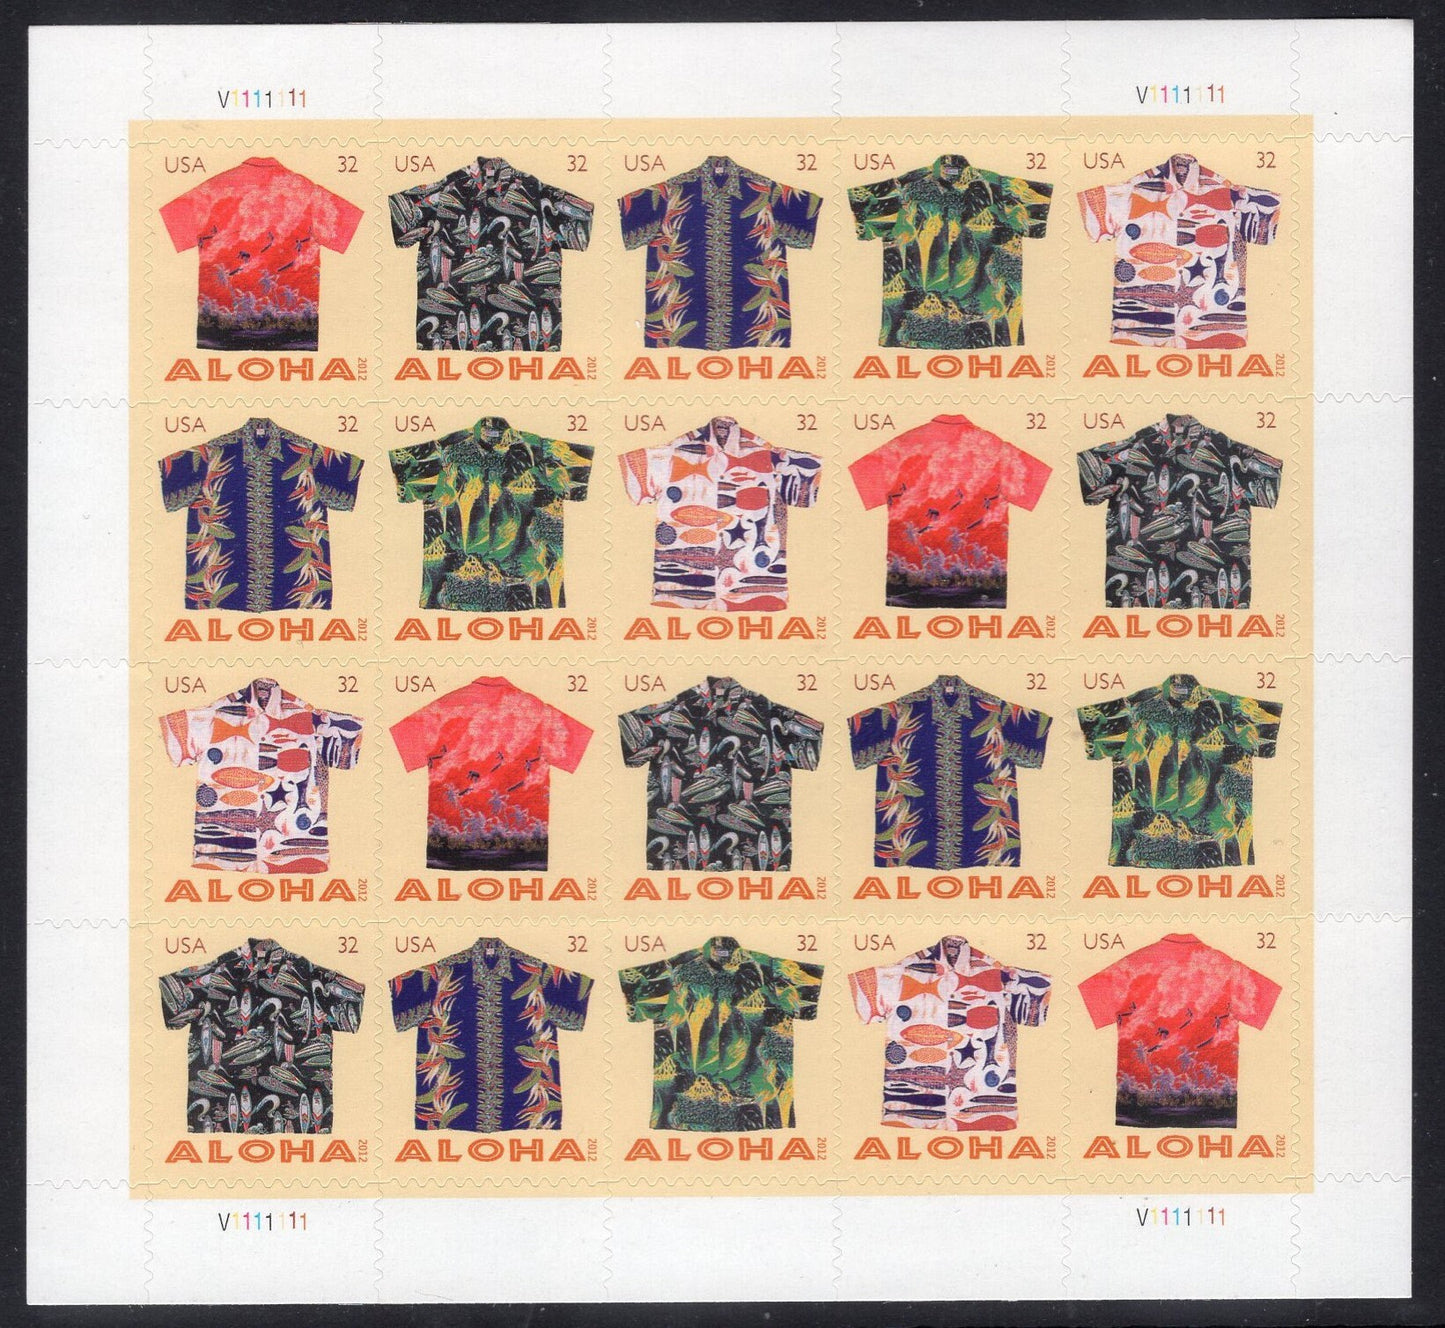 HAWAII ALOHA SHIRTS Sheet of 20 Stamps showing 4 each of 5 different Shirts Mint Bright Fresh - Issued in 2012 s4592 s -